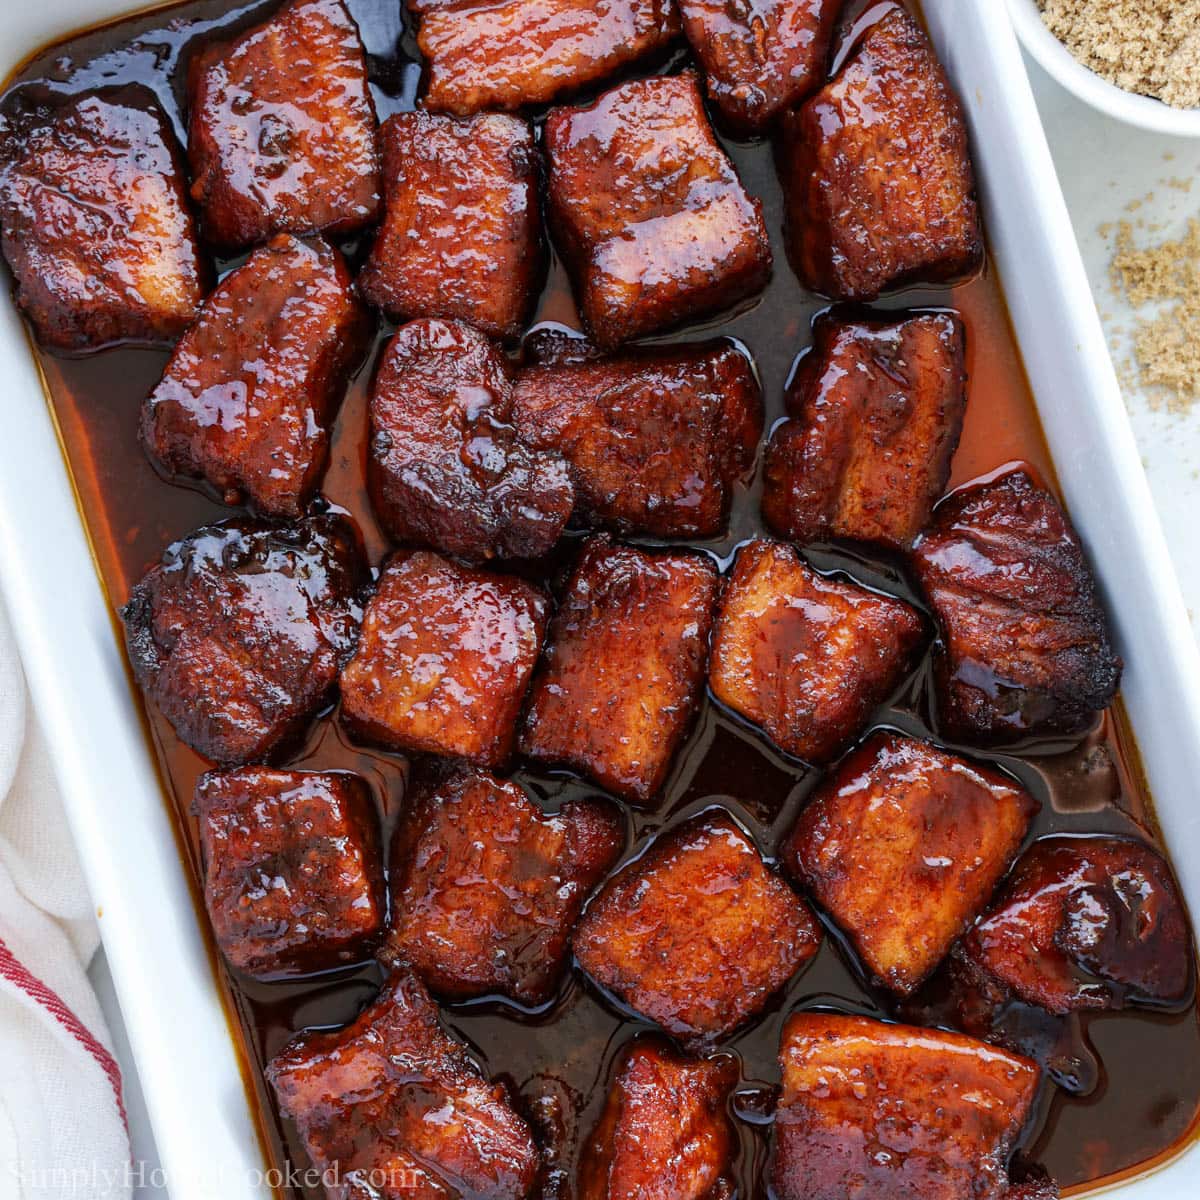 https://simplyhomecooked.com/wp-content/uploads/2022/08/pork-belly-burnt-ends-recipe-7.jpg